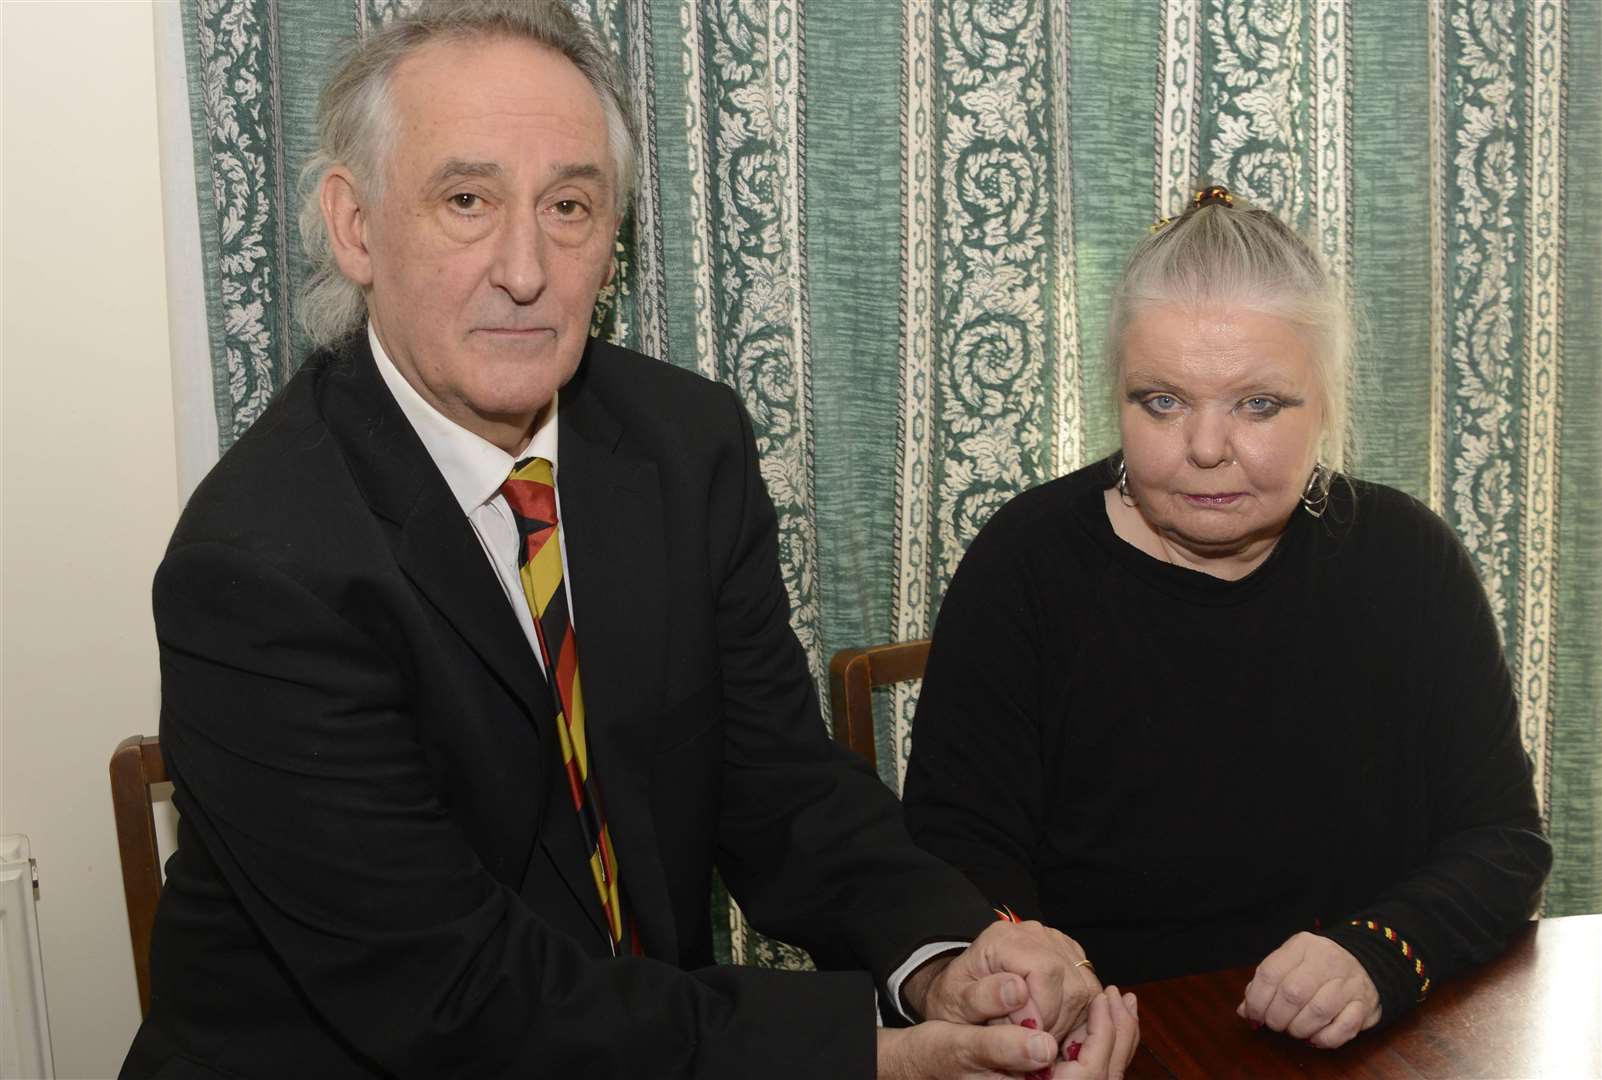 Su Gorman lost her husband after he was given contaminated blood